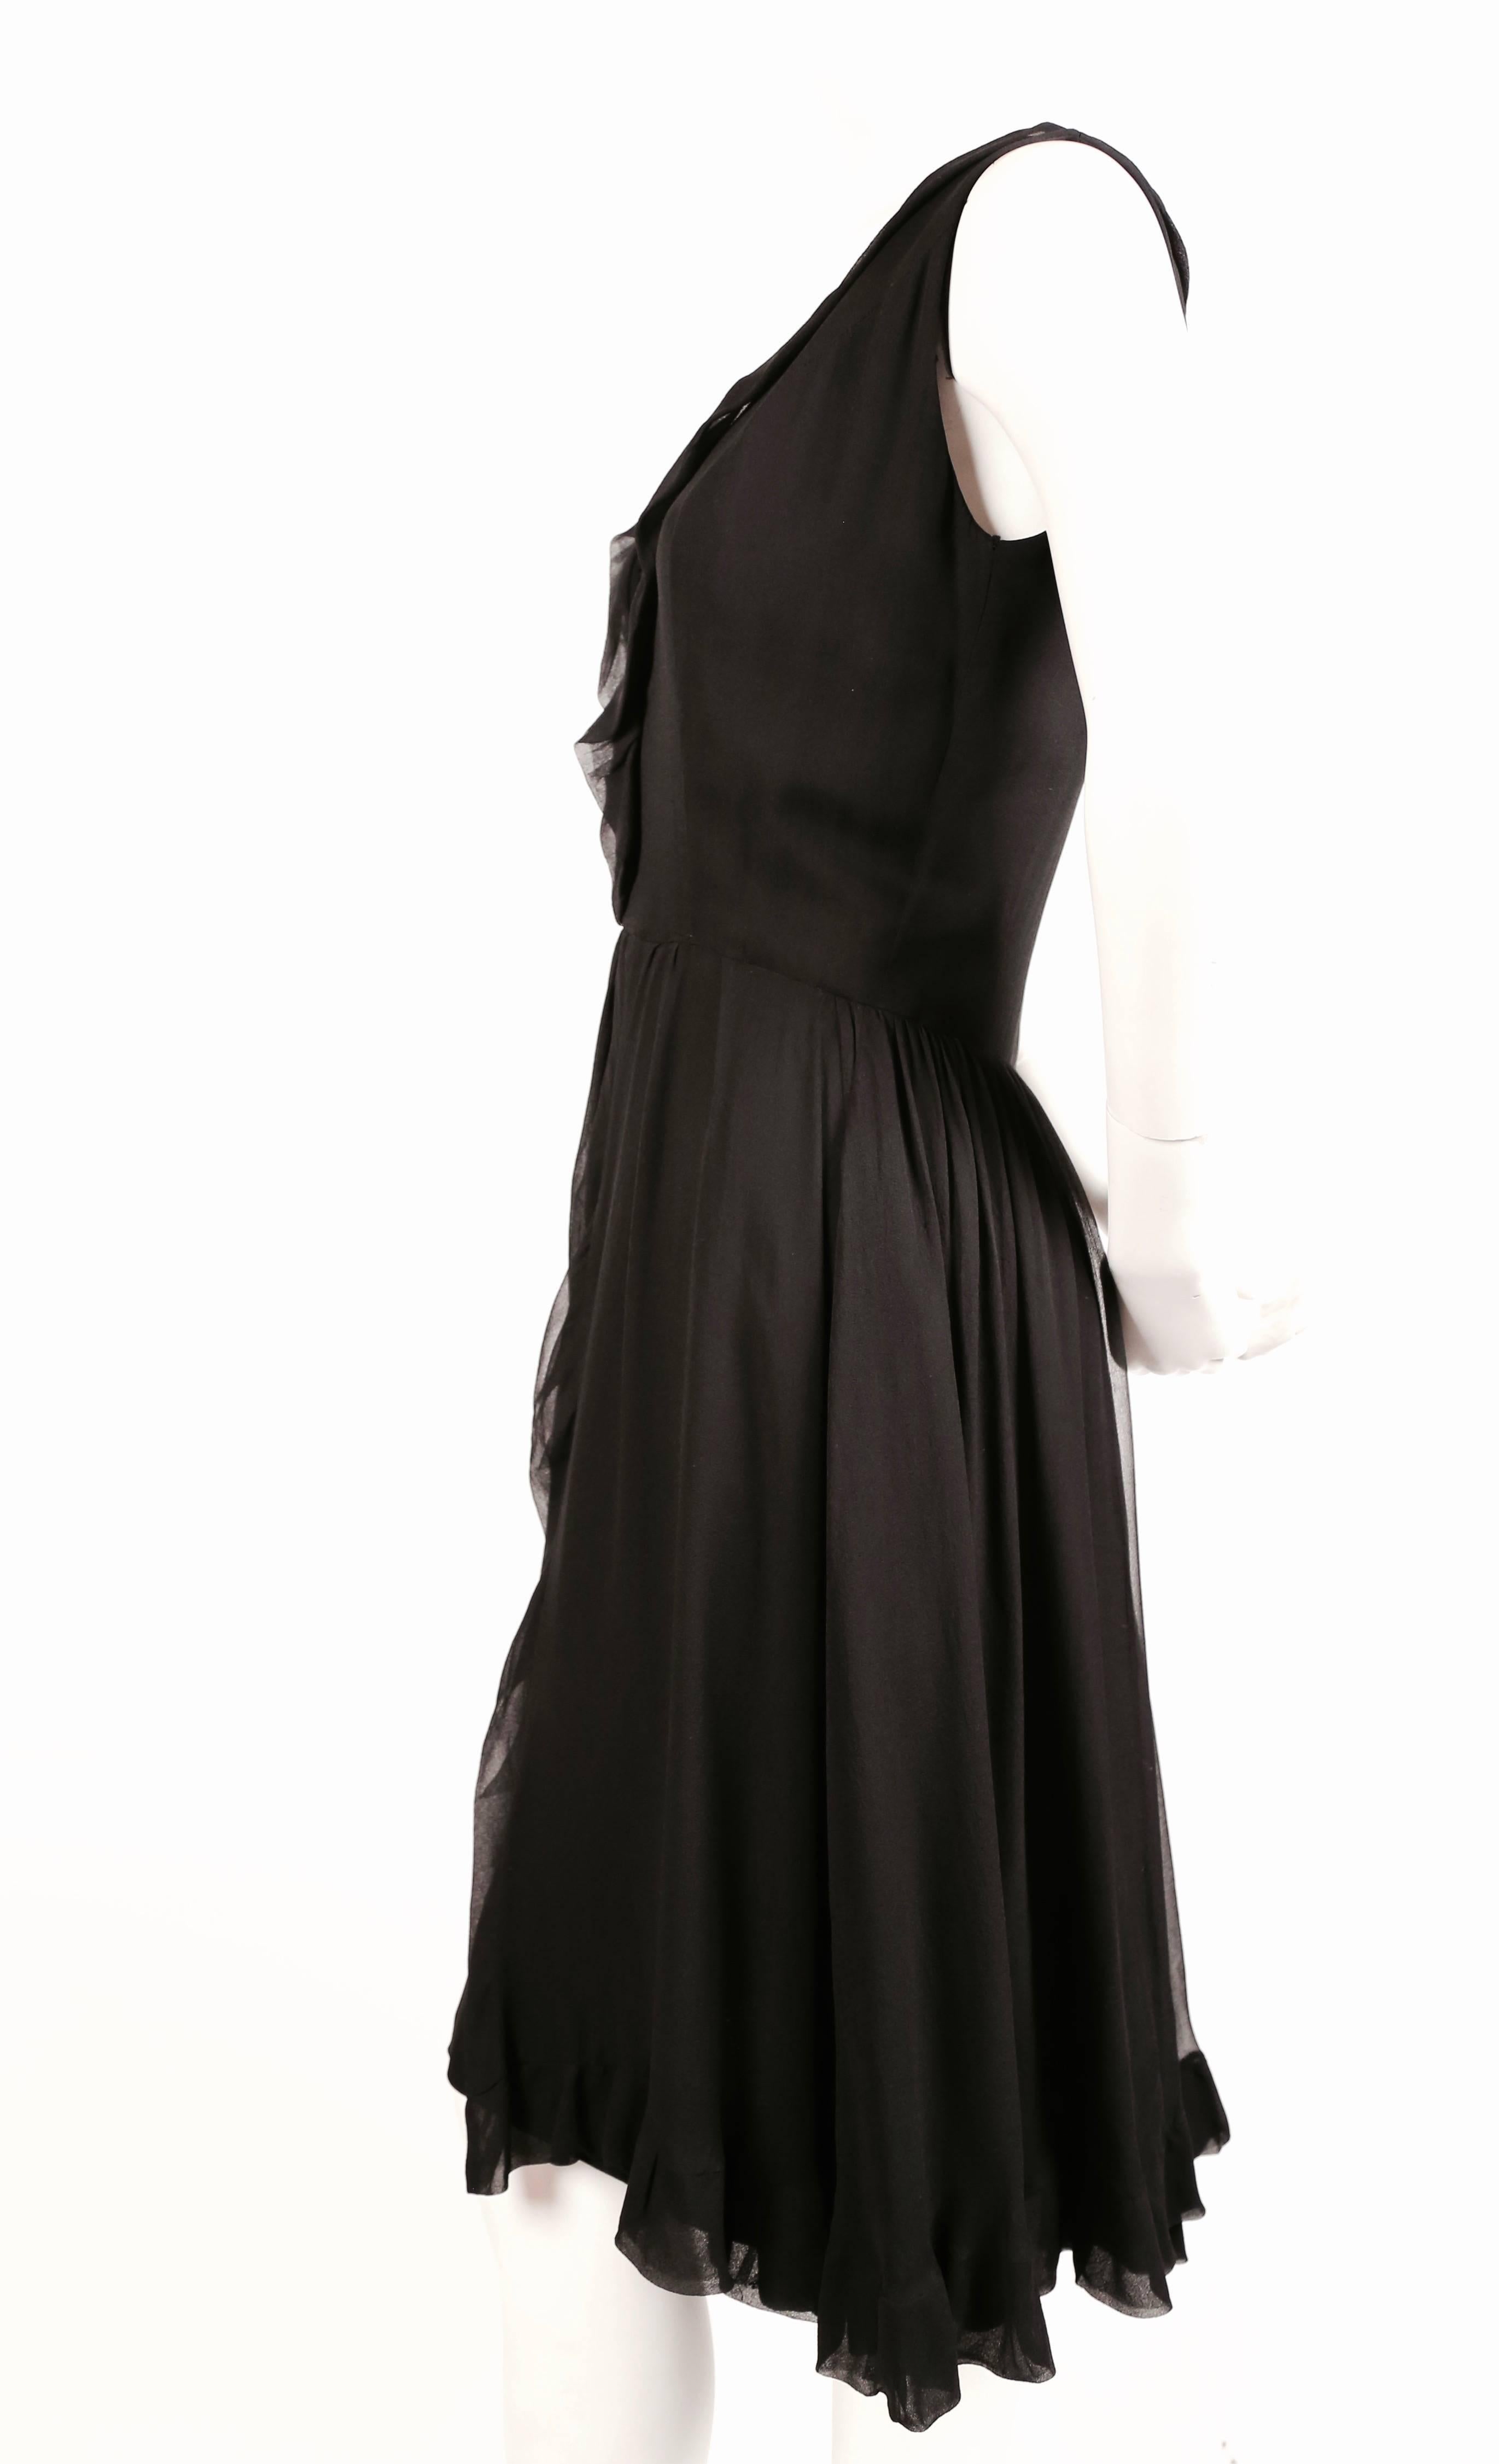 Black silk dress with sheer mousseline overlay designed by Jacques Heim made by Maria carine dating to the 1960's. Fits a US 4 or 6. Approximate measurements: bust 35-36